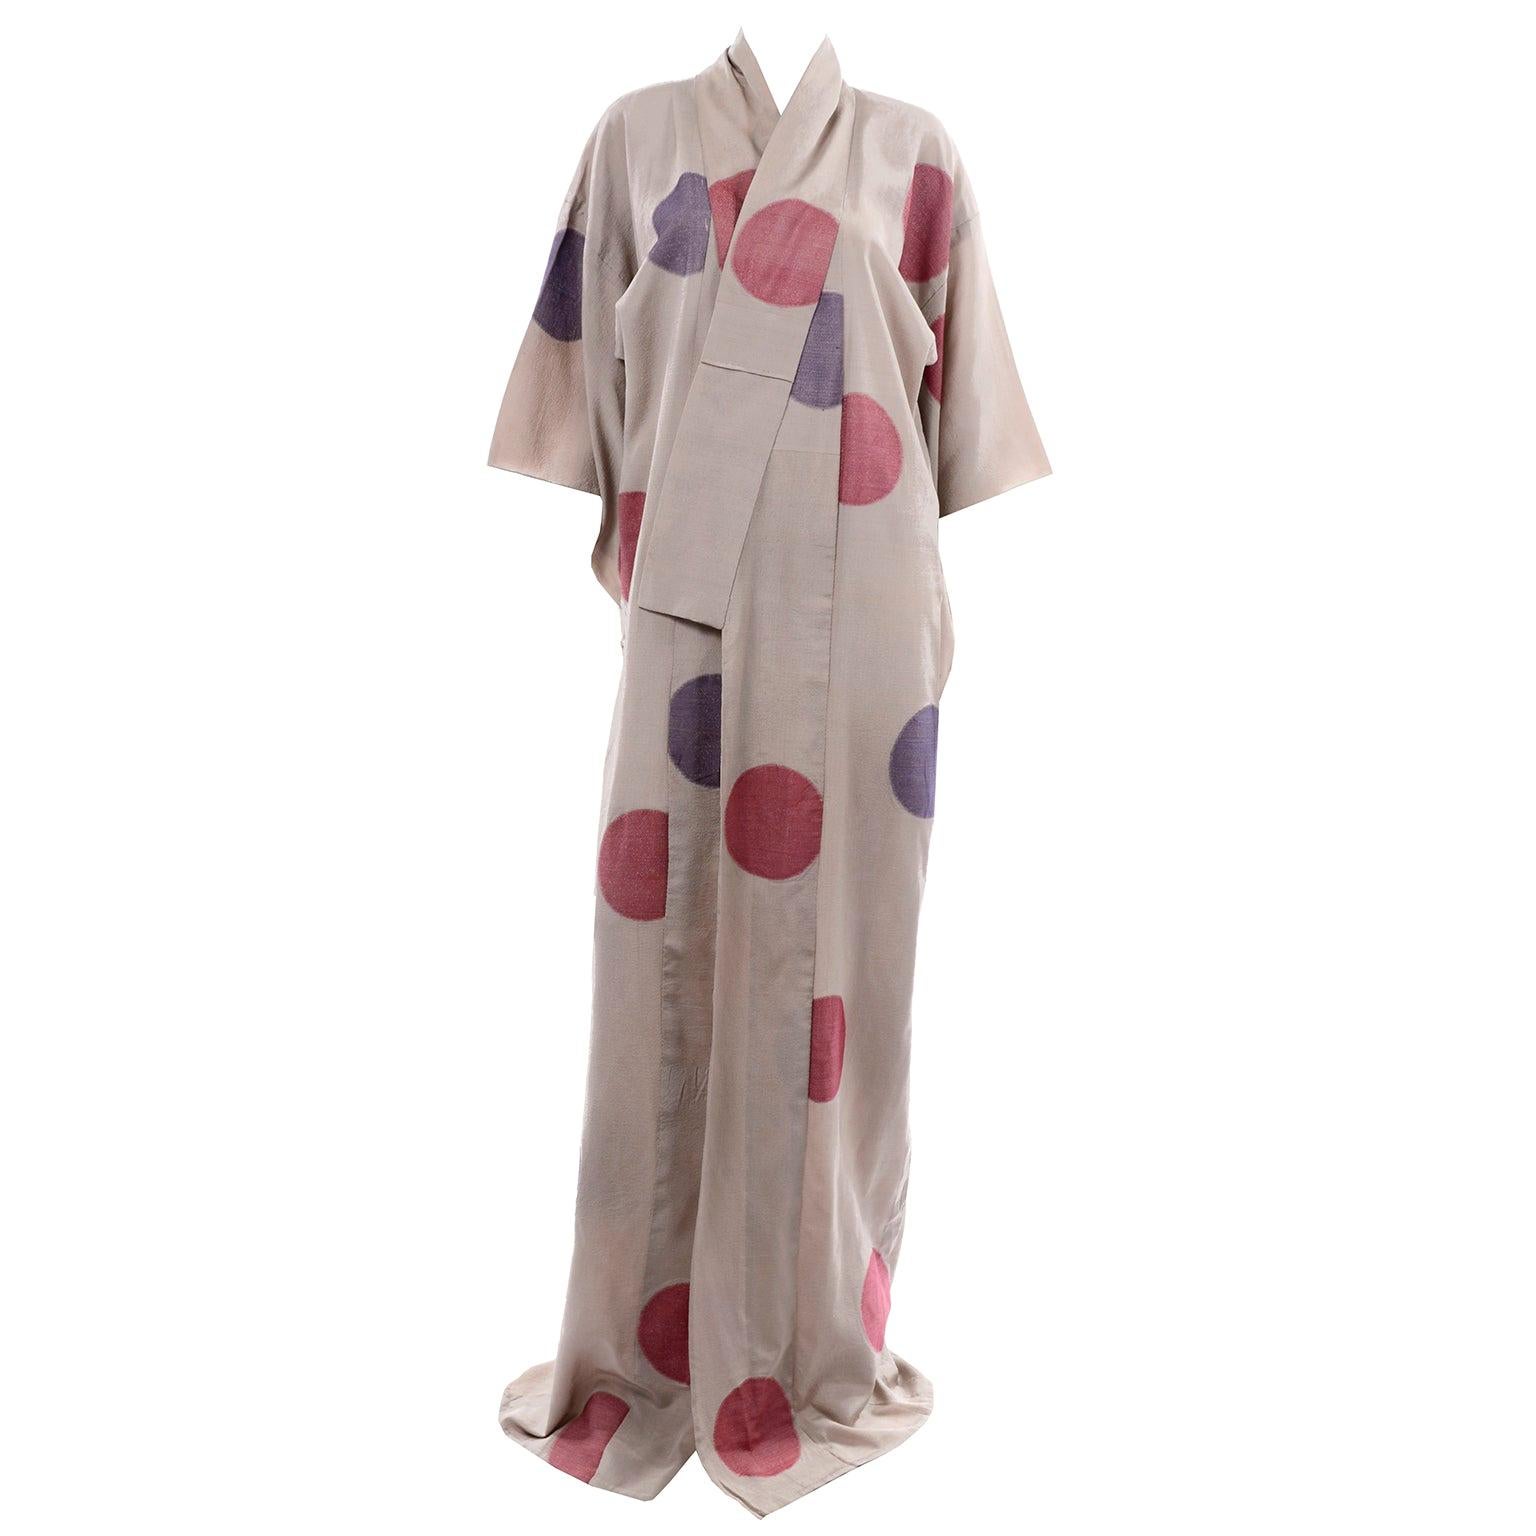 Vintage Tan Kimono With Purple and Red Lamé Circles Dots & Pink Lining